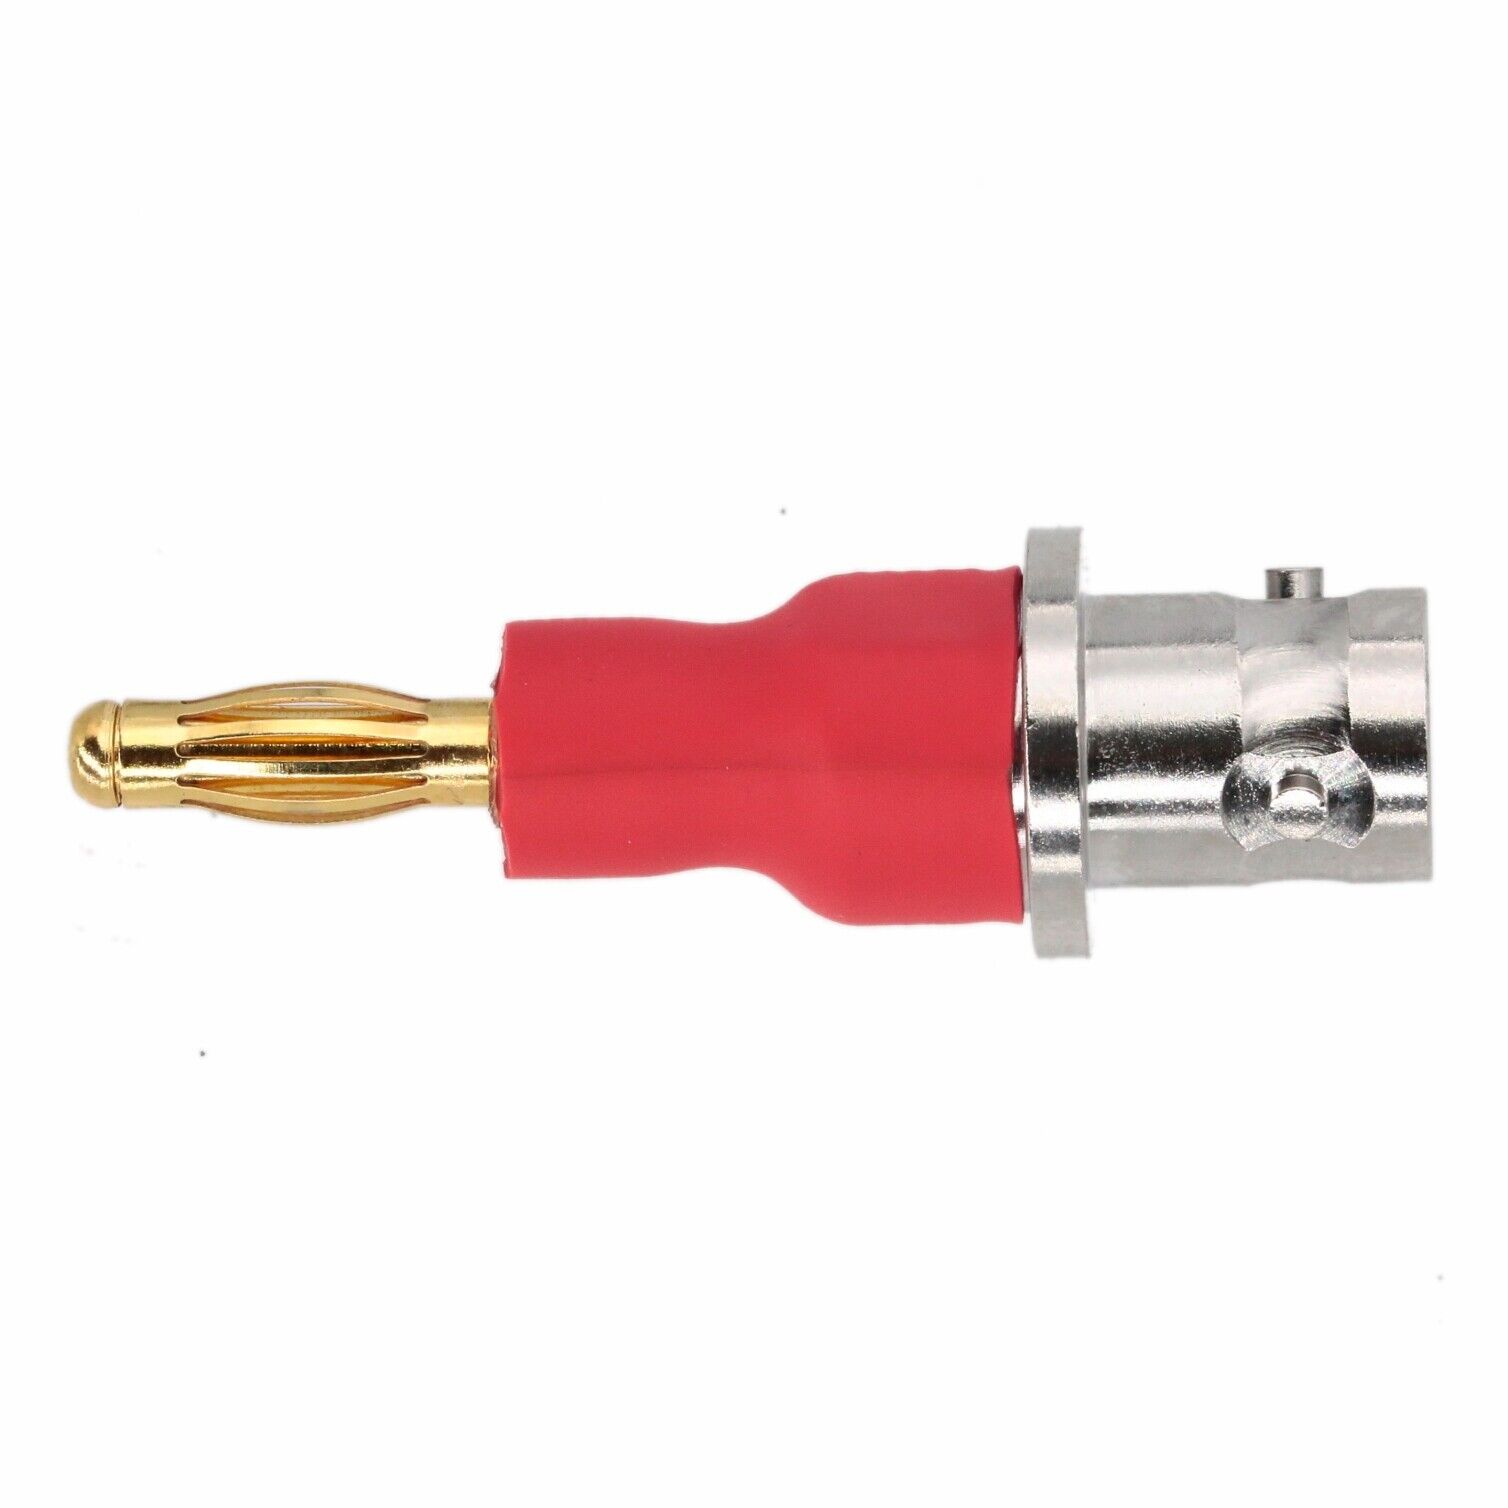 Diy Adapter 3-lugs Triaxial Trb Jack To 4mm Banana Plug For Keithley Souce Meter